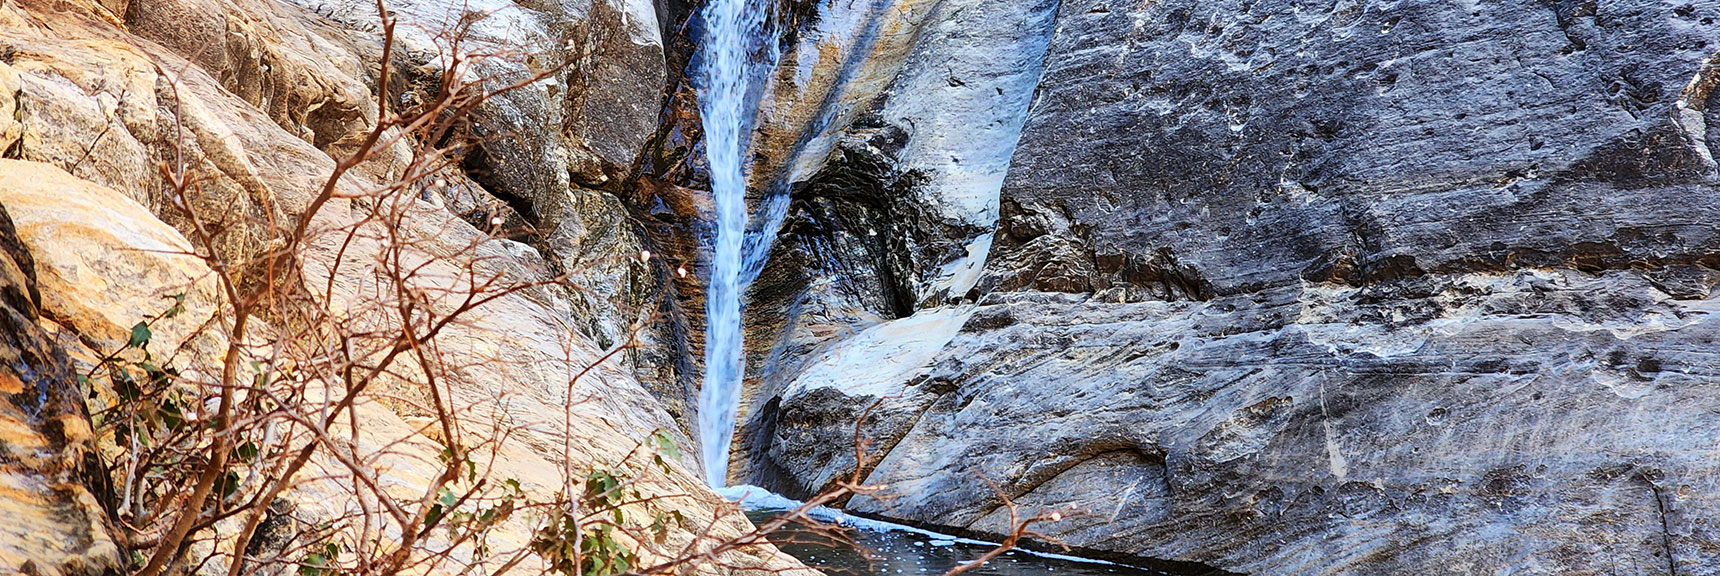 Closer View of Lower Waterfall. Will Appear Different Based on Seasonal Water Flow | Ice Box Canyon | Red Rock Canyon NCA, Nevada | Las Vegas Area Trails | David Smith